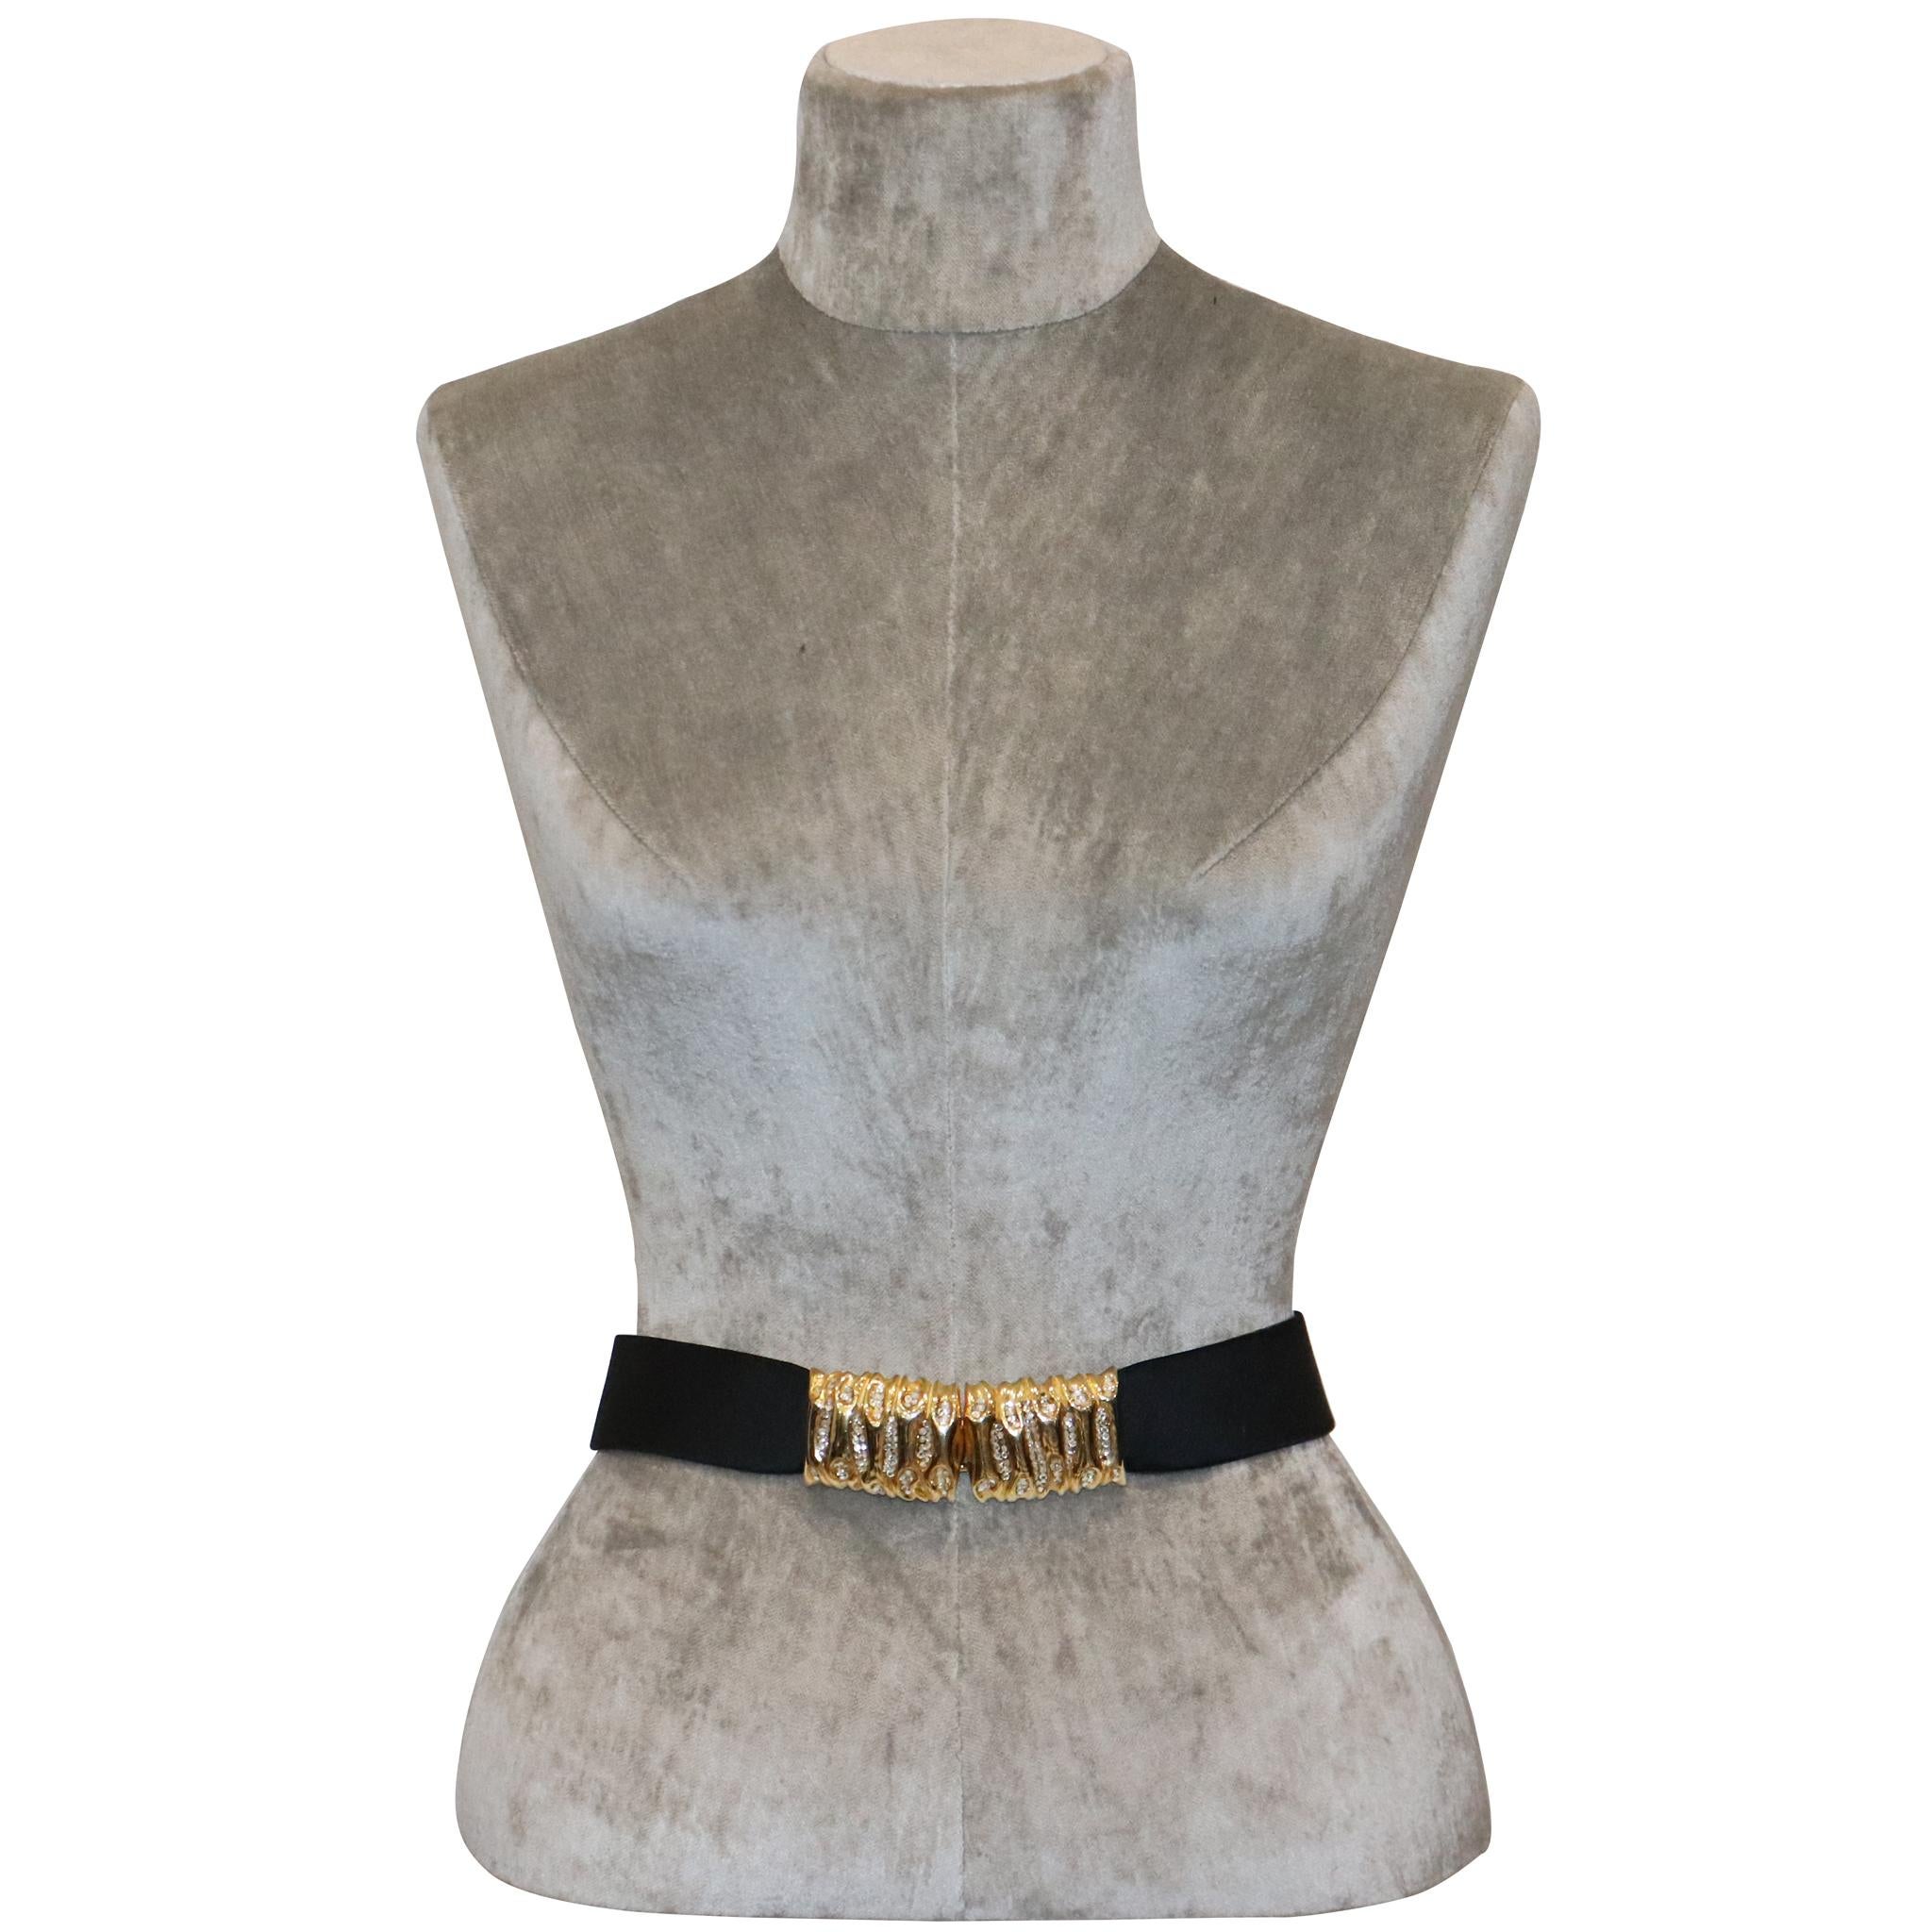 Judith Leiber Black Satin Belt W/ Rhinestone Accents. In excellent condition 

Measurements: 

Longest length - 33.1 inches 

Shortest length - 31 inches 

Height - 1.5 inches 